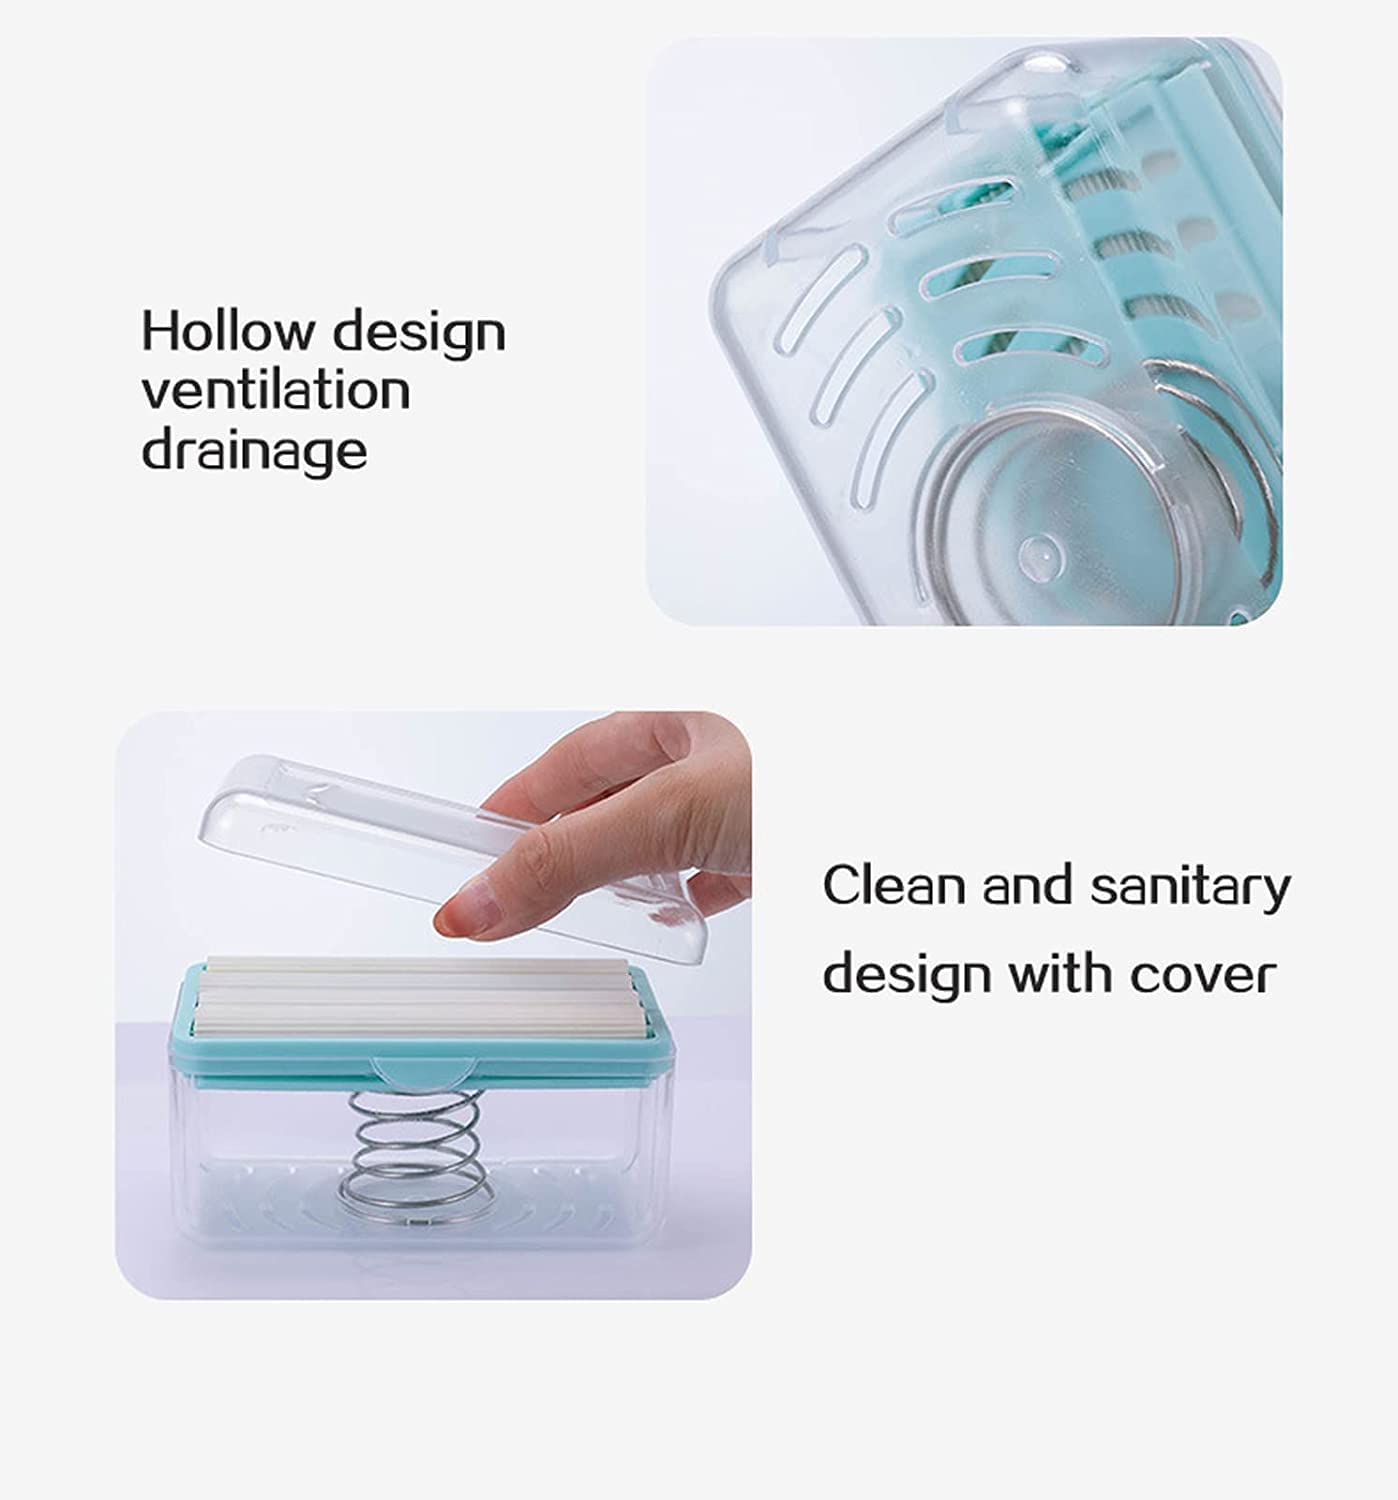 2-IN-1 PORTABLE SOAP ROLLER DISH & SOAP DISPENSER WITH ROLLER AND DRAIN HOLES, MULTIFUNCTIONAL SOAP HOLDER FOAMING SOAP BAR BOX FOR HOME, KITCHEN, BATHROOM